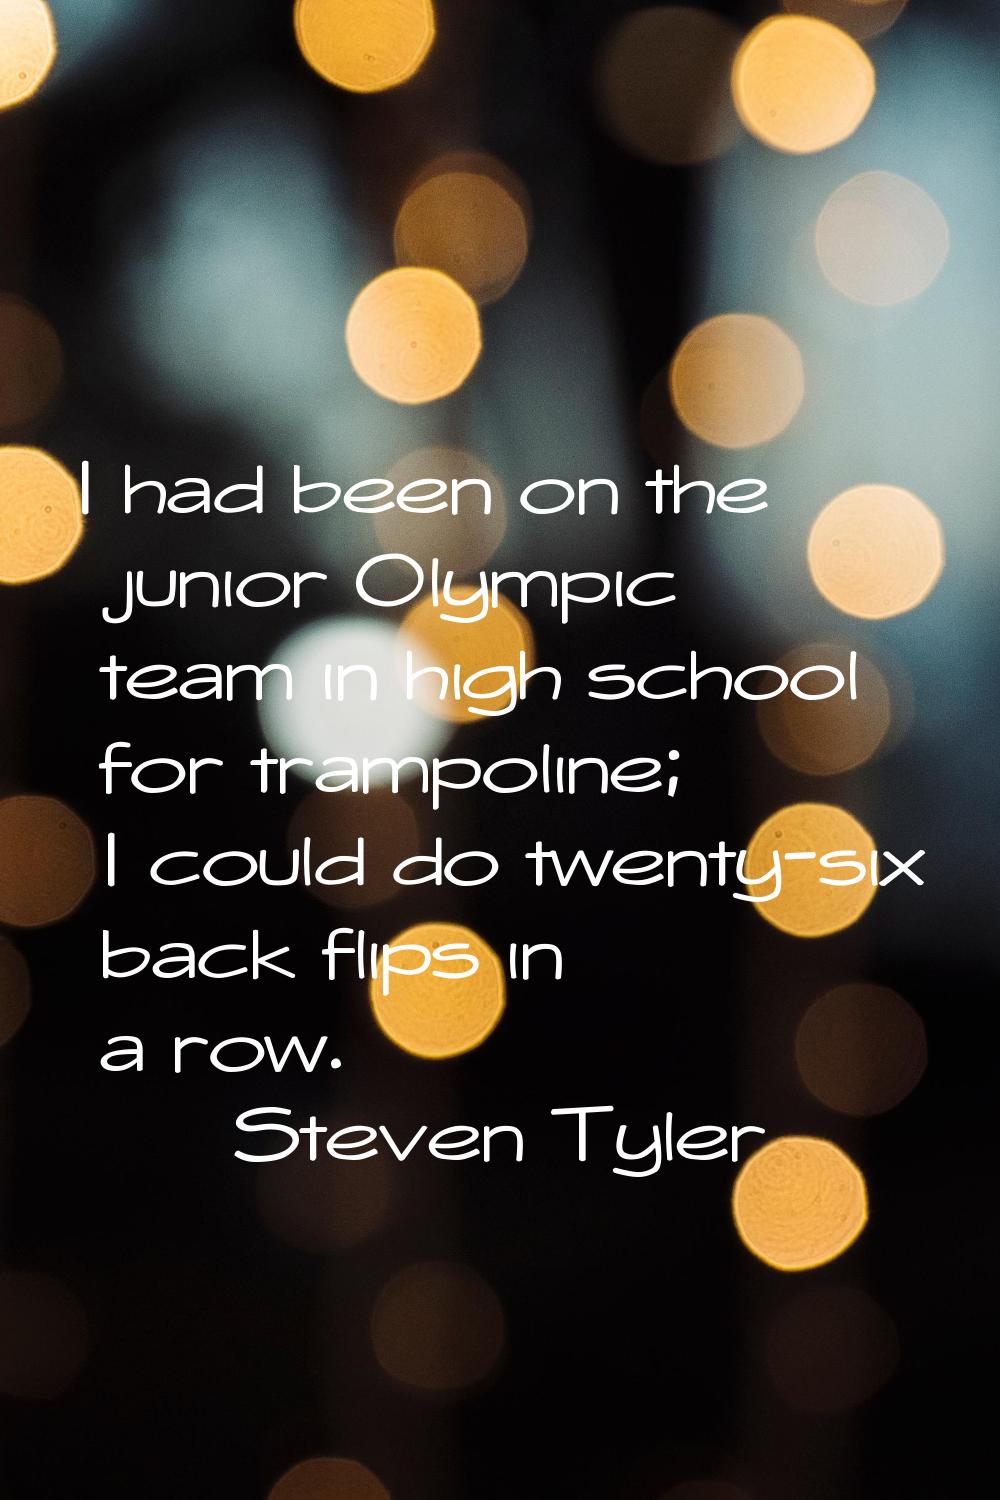 I had been on the junior Olympic team in high school for trampoline; I could do twenty-six back fli